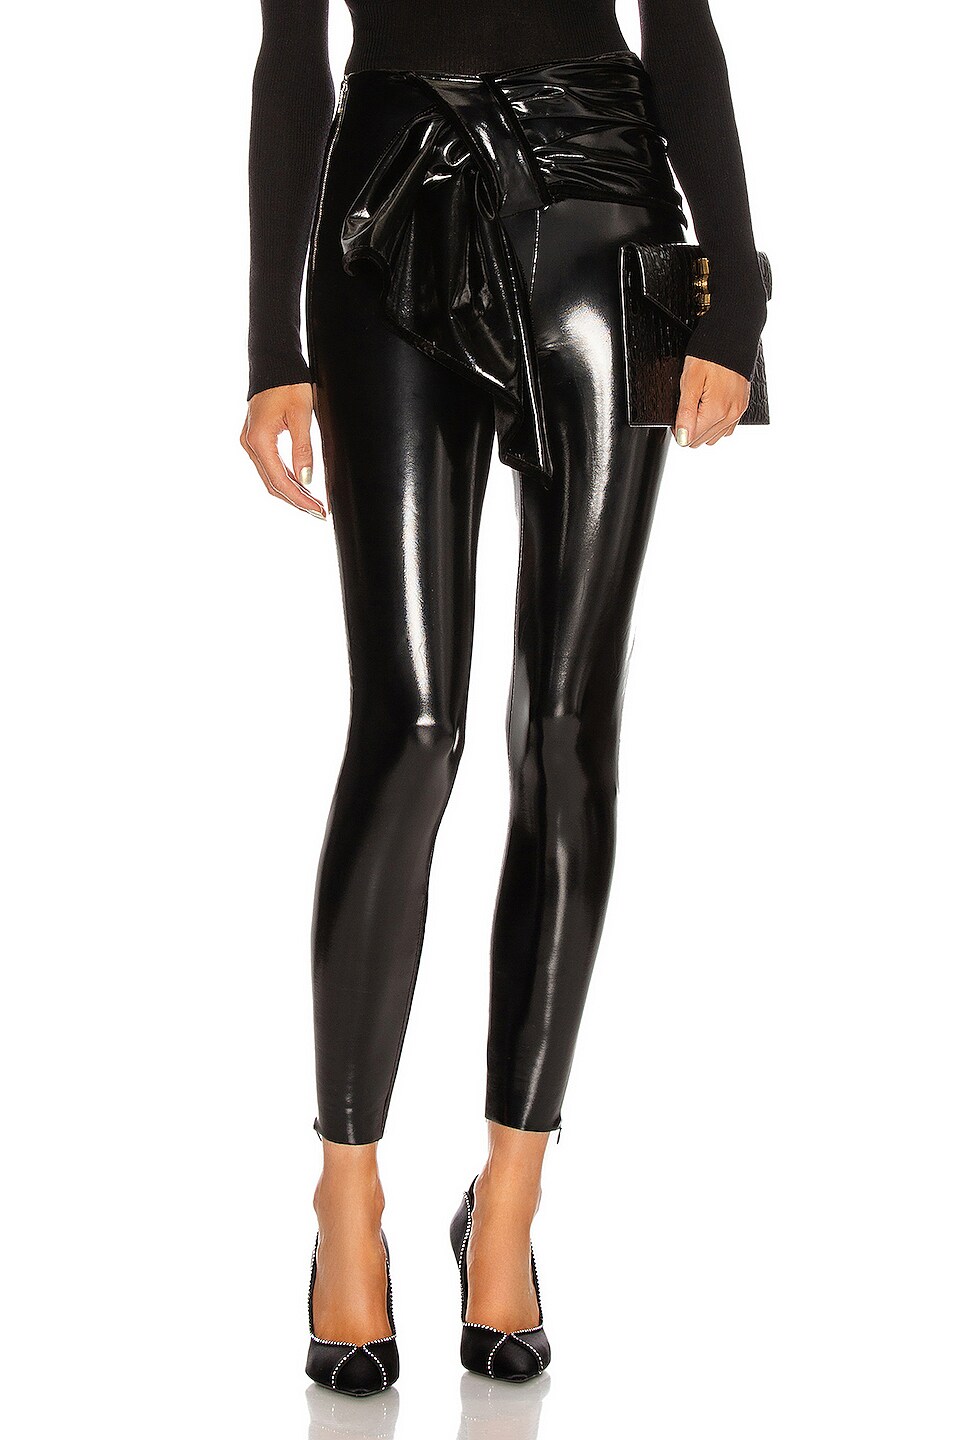 Image 1 of Raisa Vanessa Side Bow Patent Leather Pant in Black